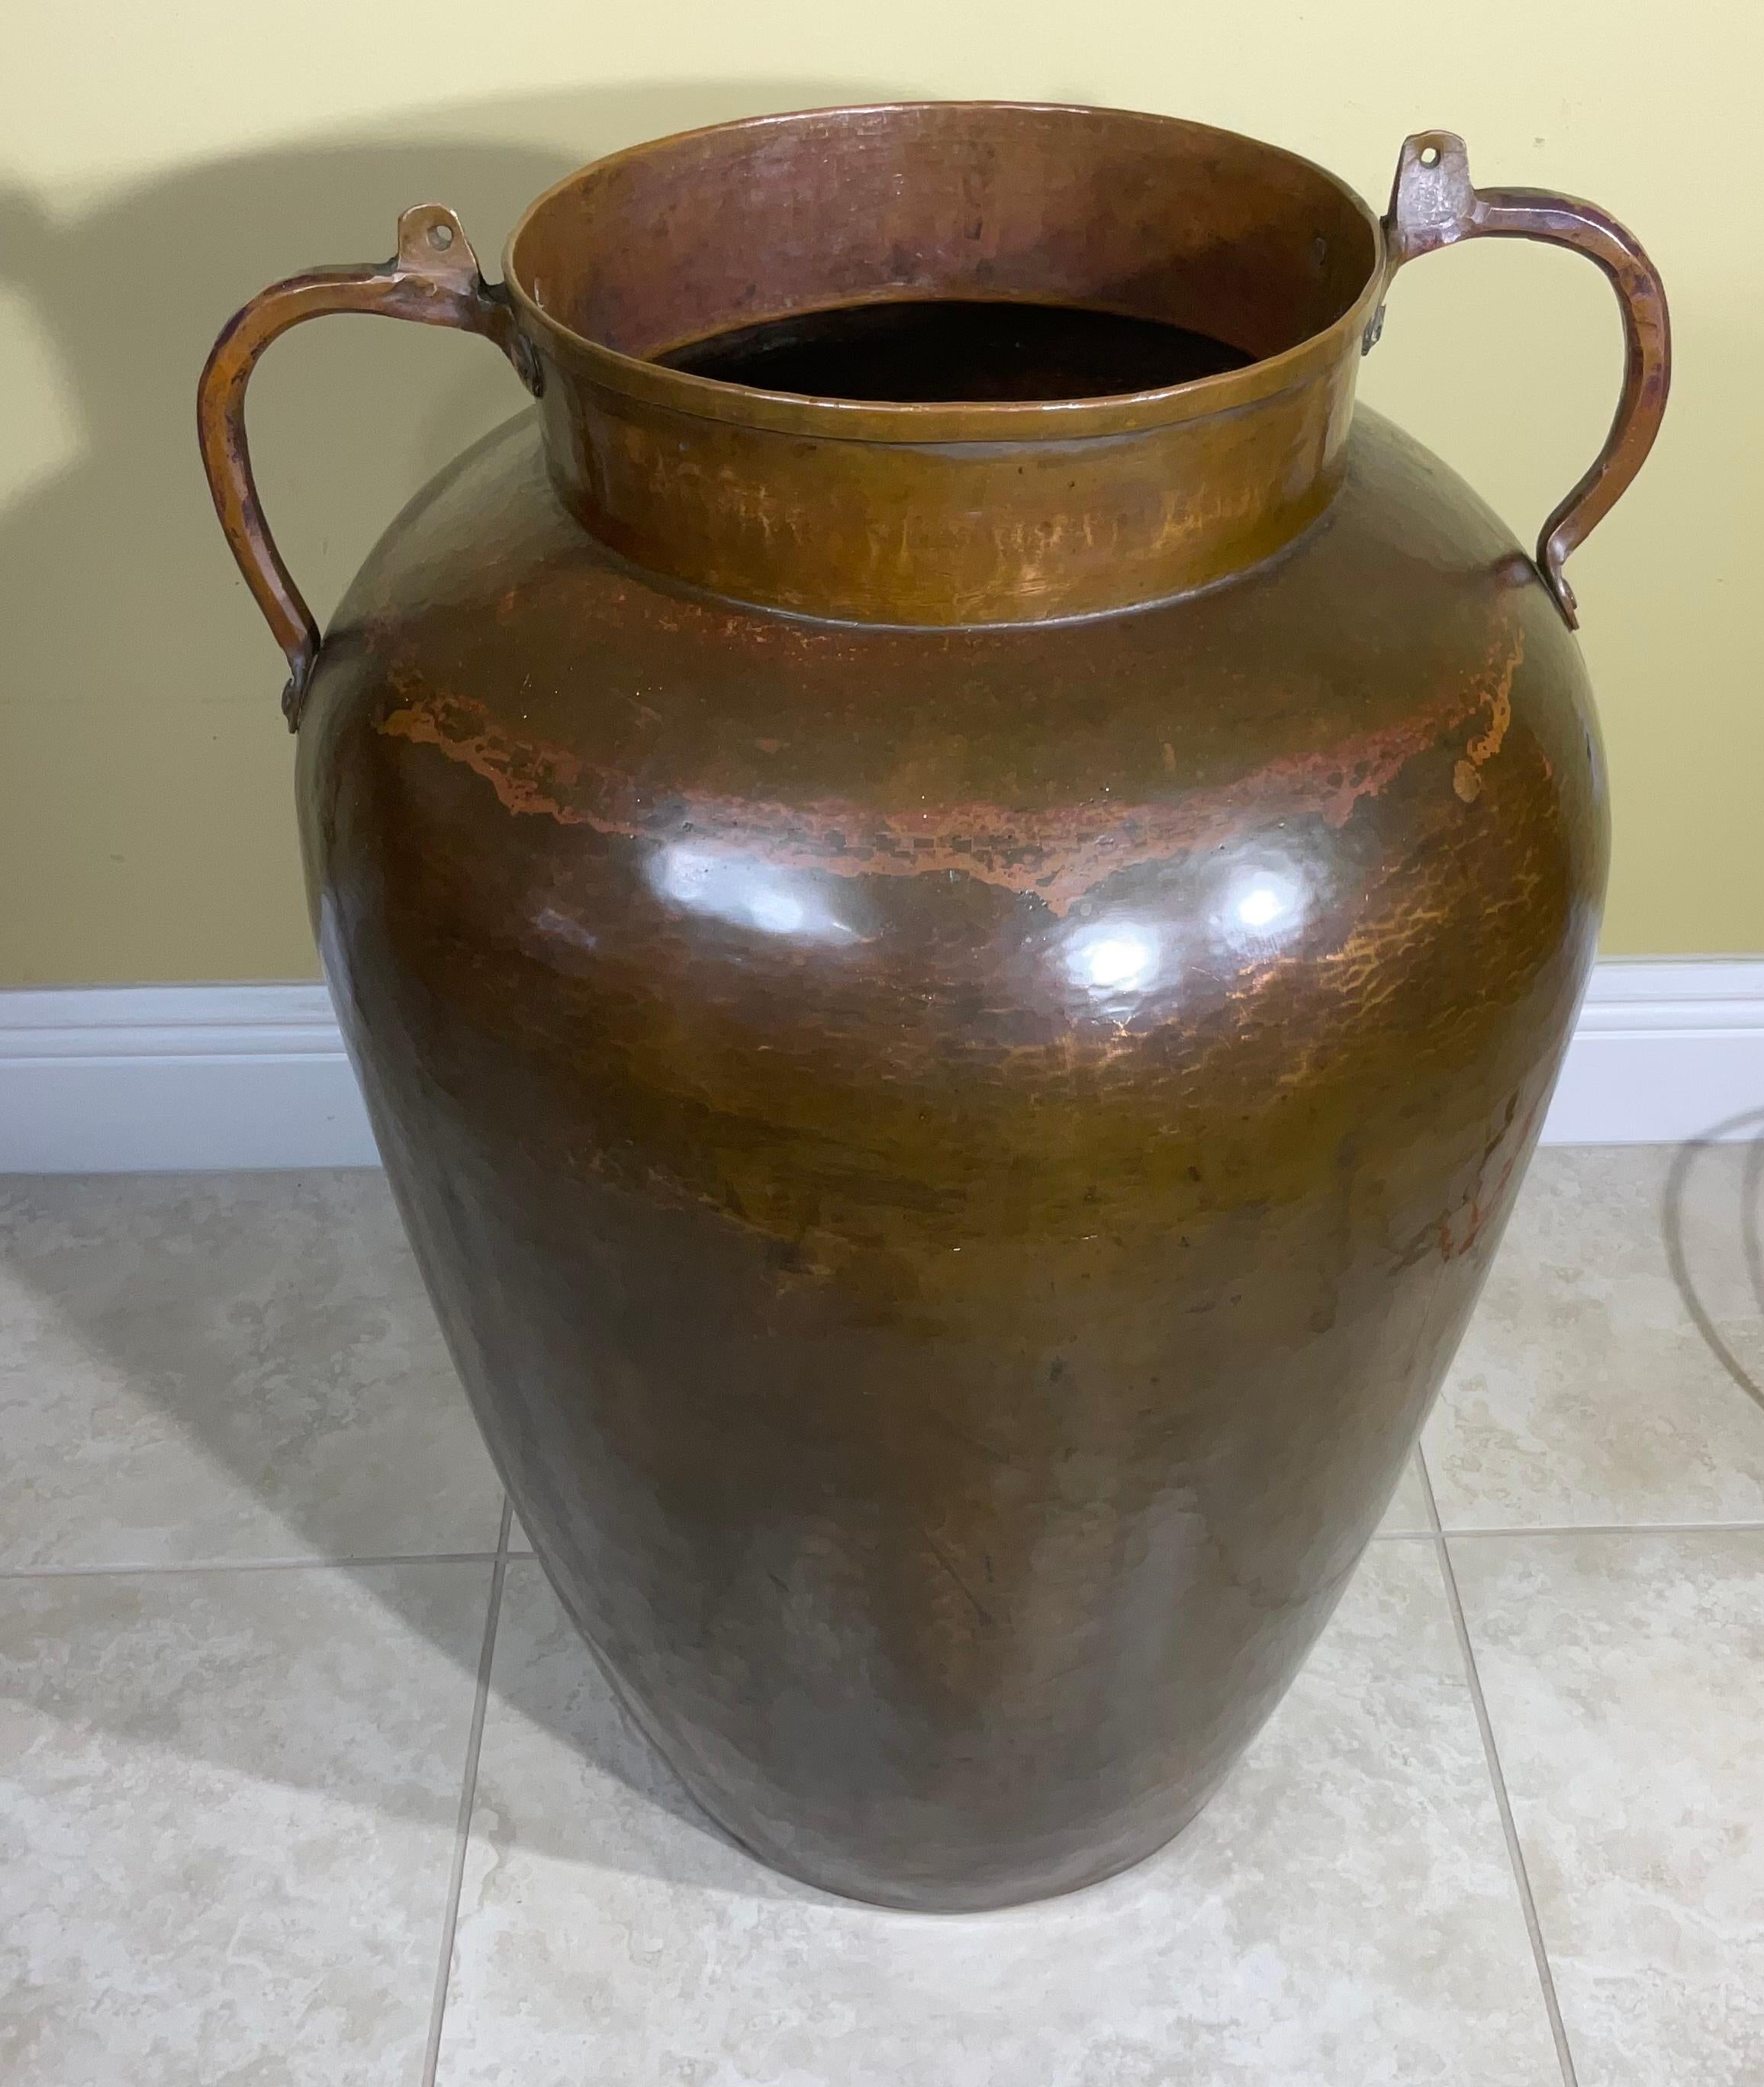 Exceptional Hand crafted hammered copper vessel, probably made for American moonshine era Producer. The large copper vessels were used for storage. However this artisan vase has two decorative handles and is functional and could be use even as